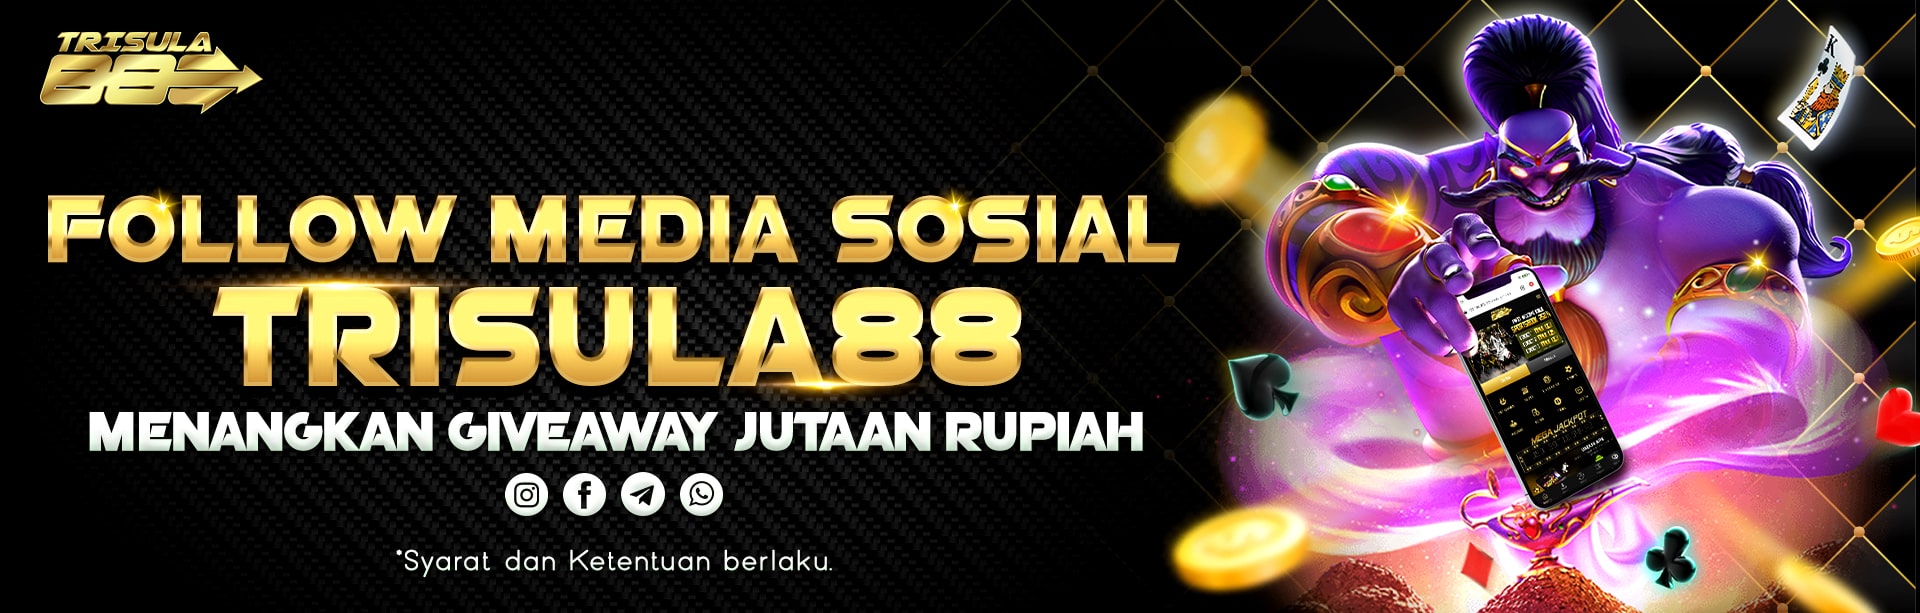 GIVEAWAY SOSIAL MEDIA TRISULA88